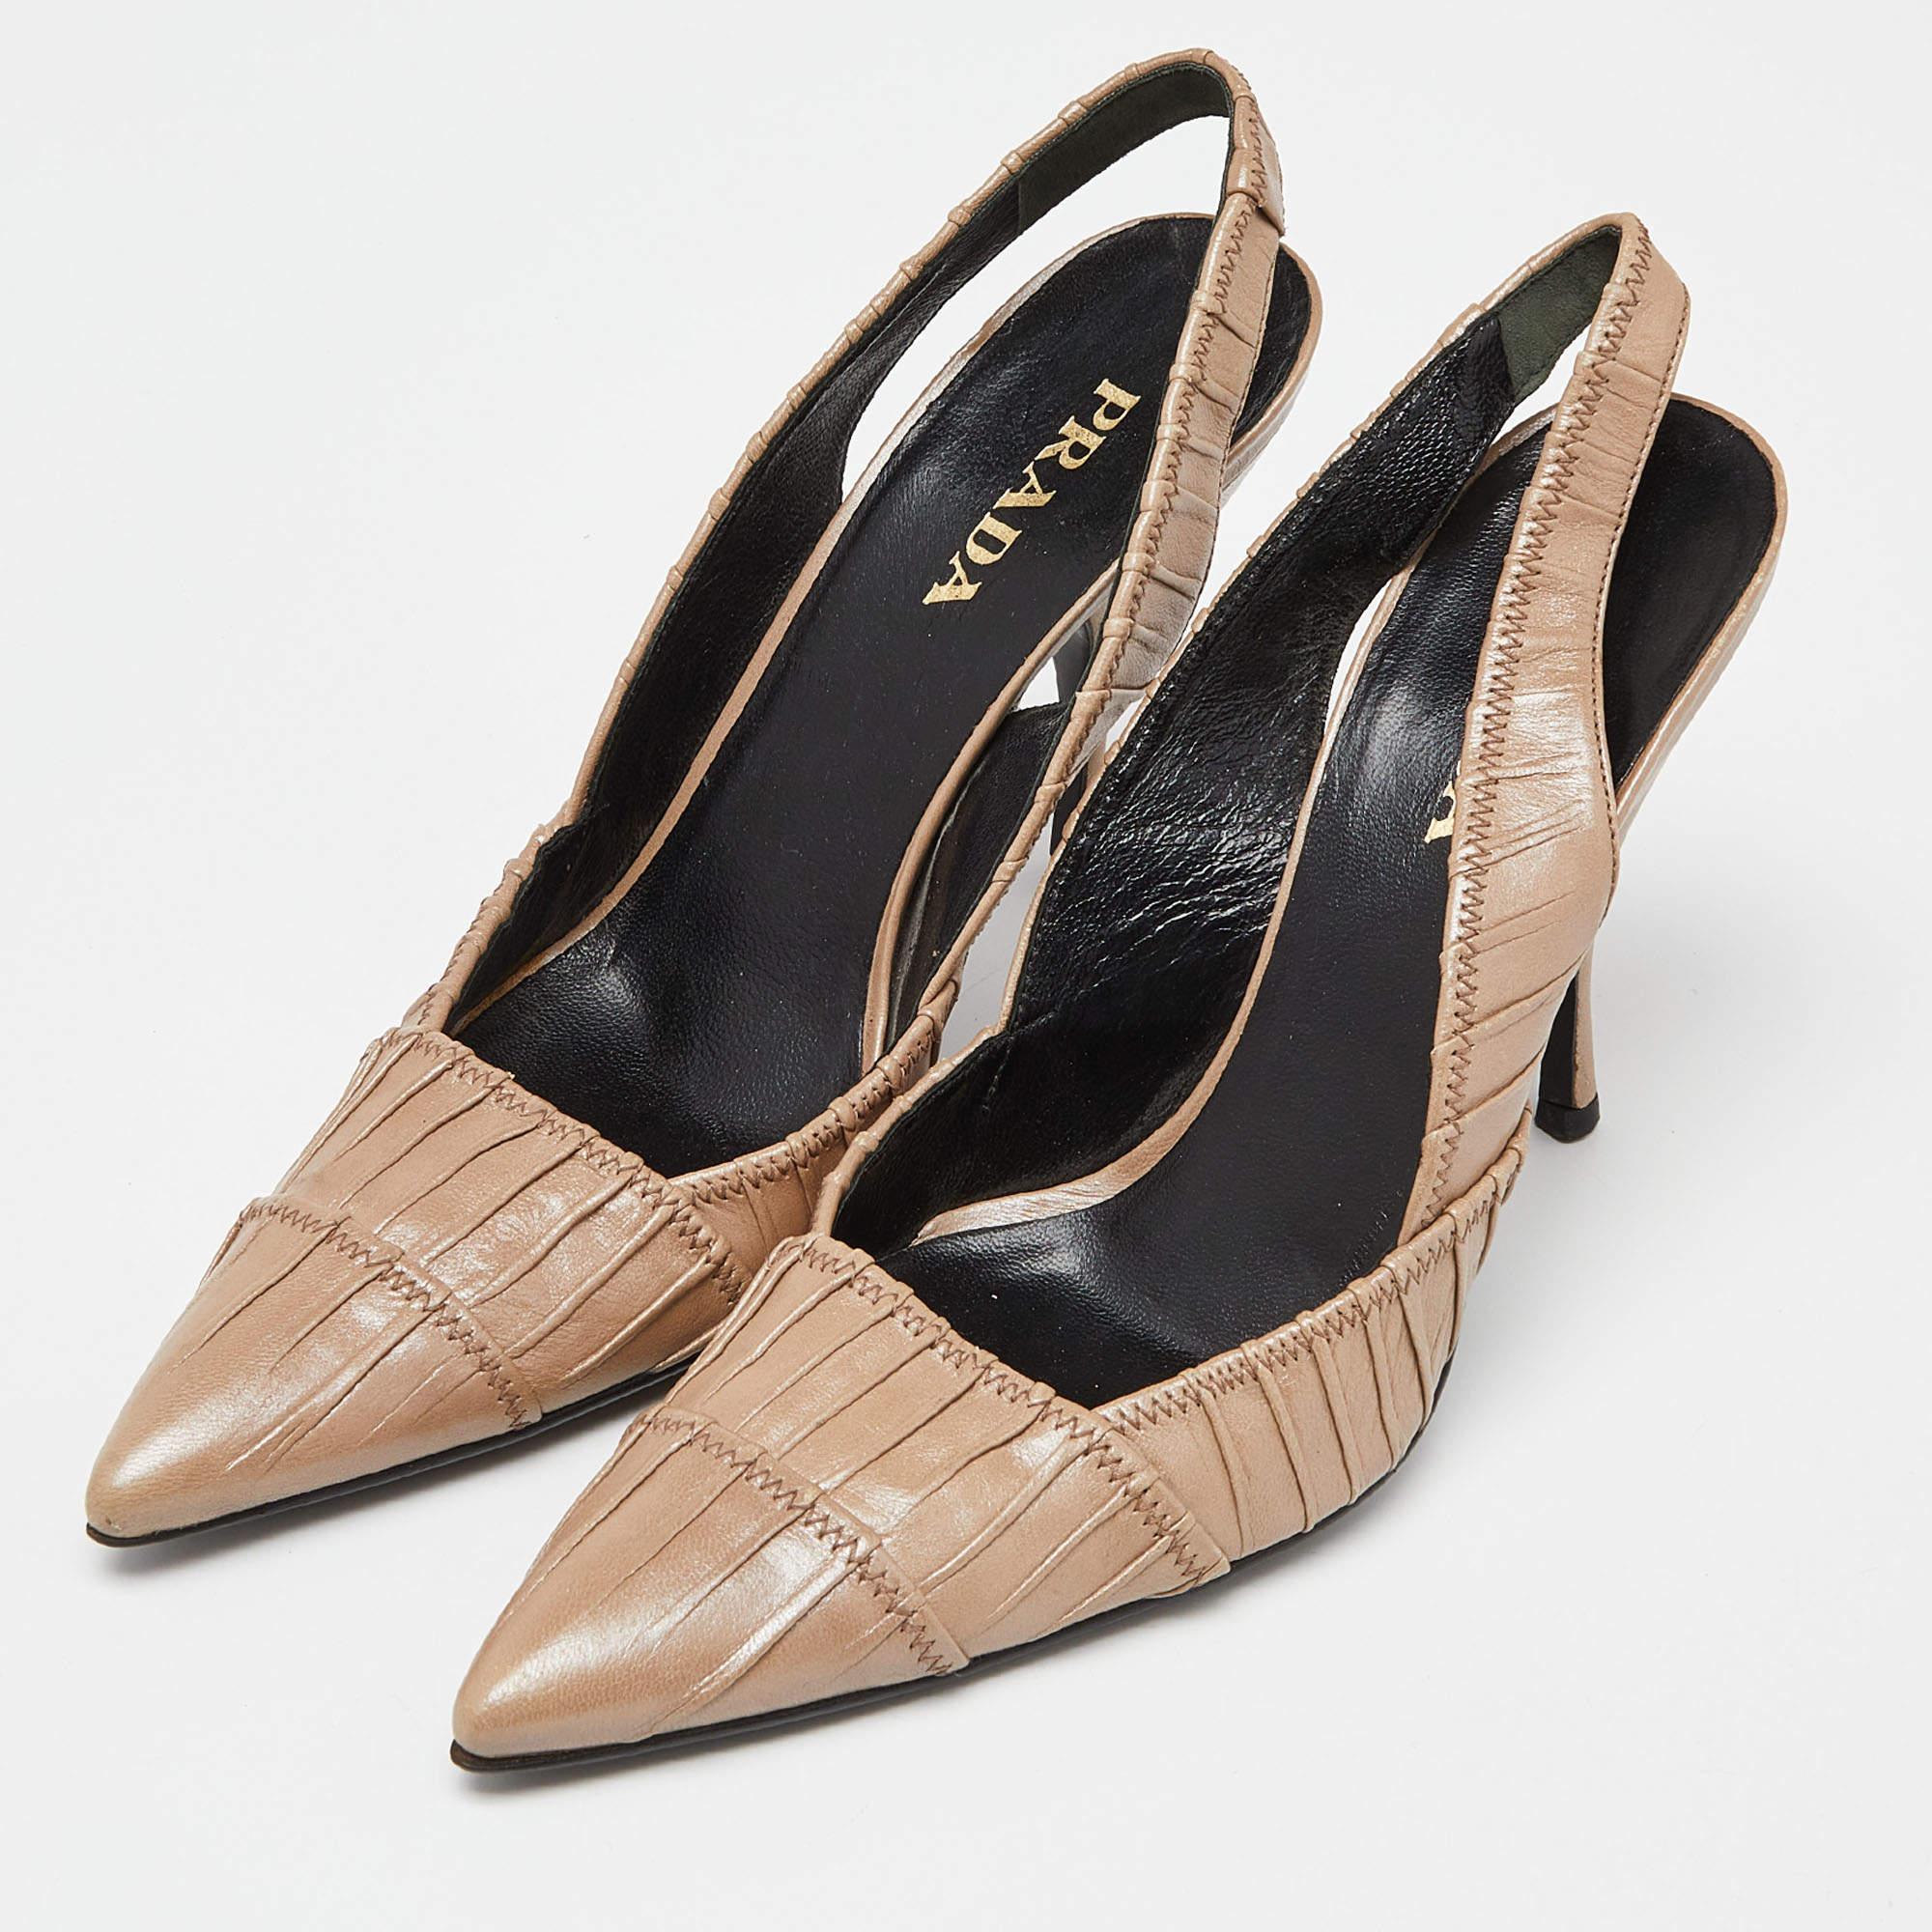 Prada Beige Pleated Leather Slingback Sandals Size 38 For Sale 2